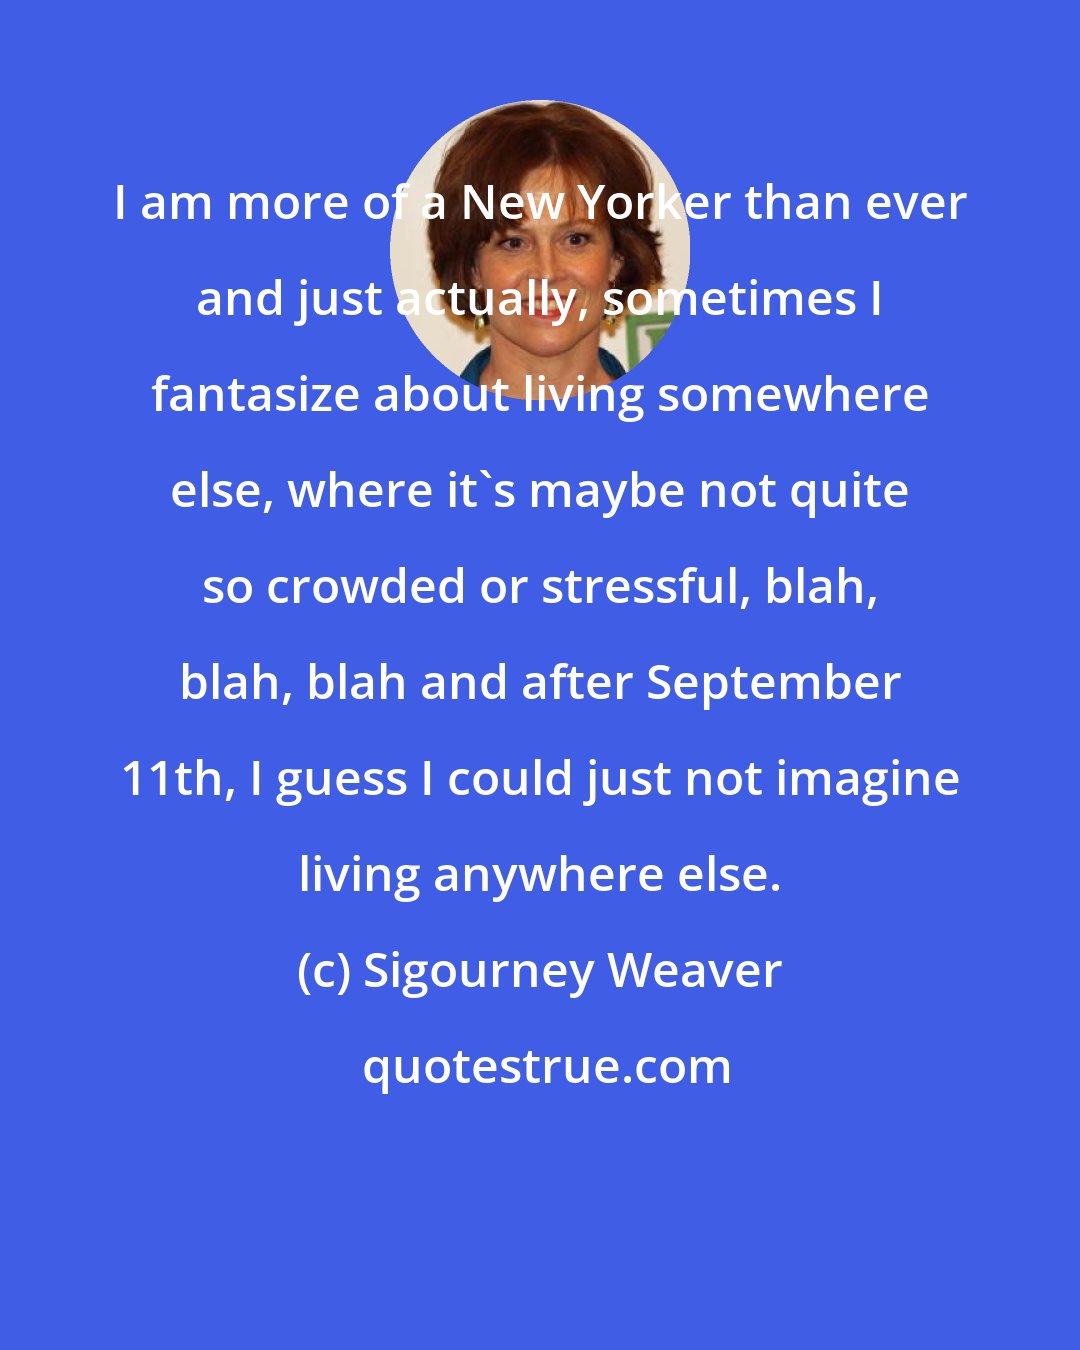 Sigourney Weaver: I am more of a New Yorker than ever and just actually, sometimes I fantasize about living somewhere else, where it's maybe not quite so crowded or stressful, blah, blah, blah and after September 11th, I guess I could just not imagine living anywhere else.